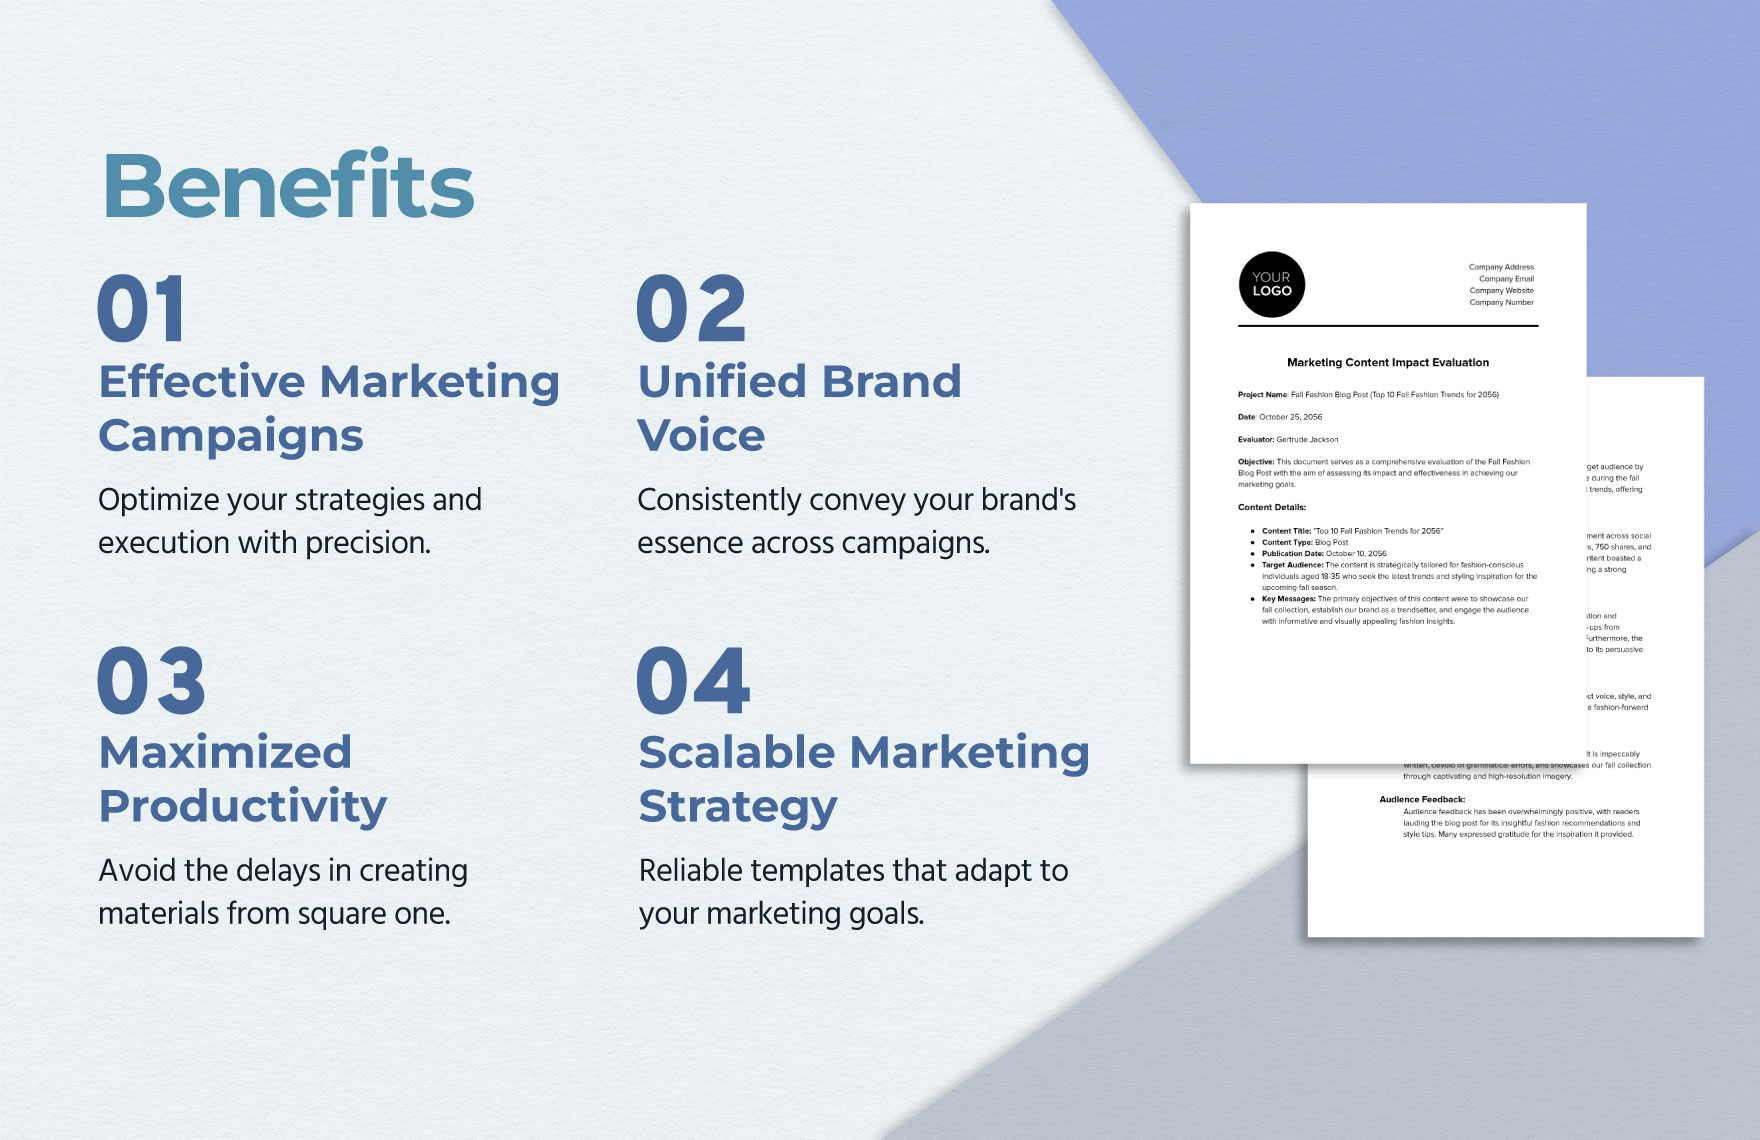 Marketing Content Impact Evaluation Template